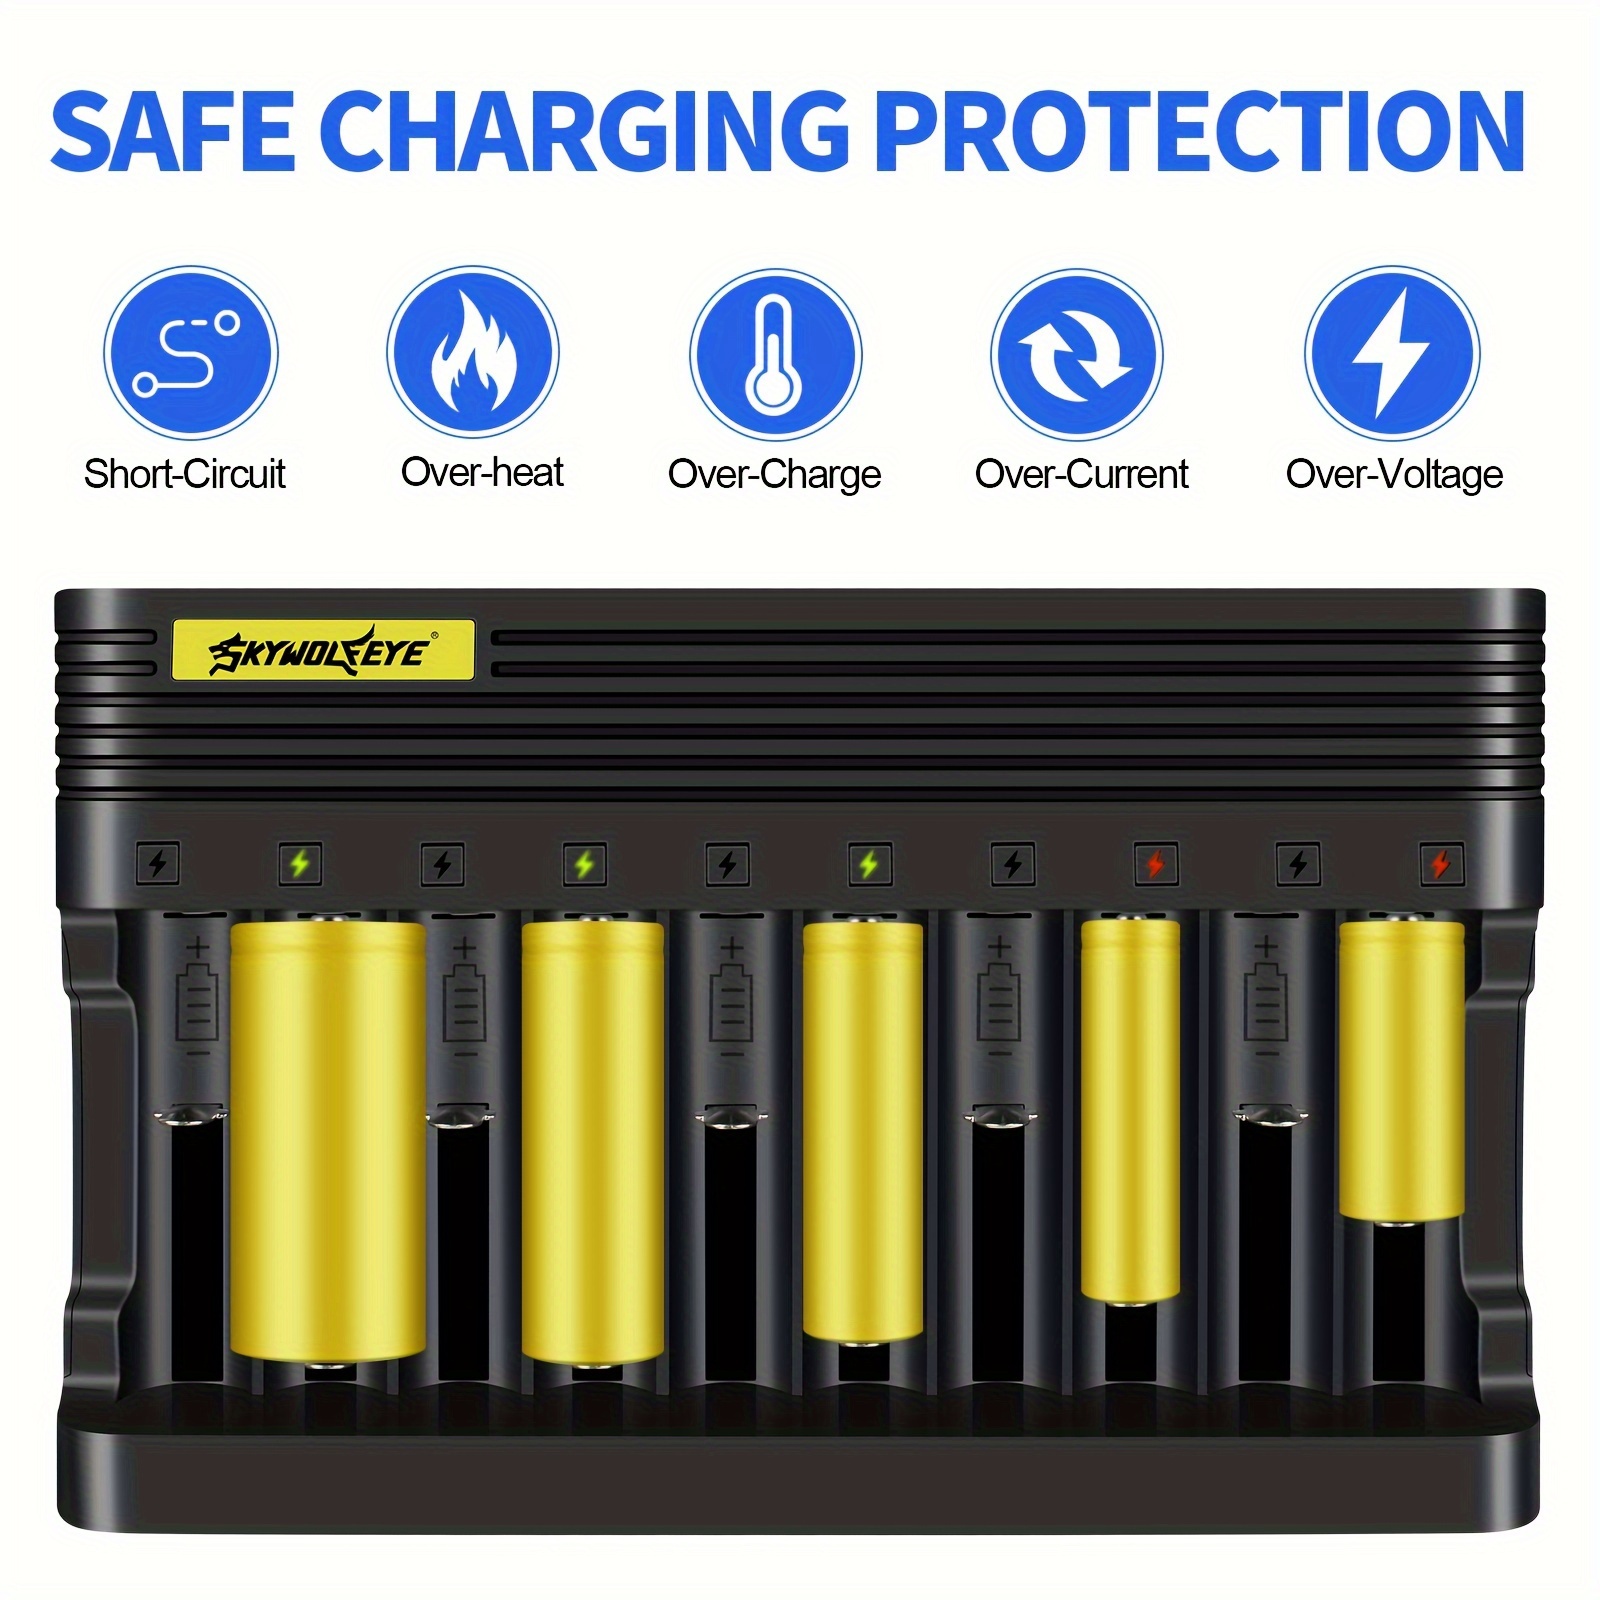 

10 Slot Intelligent Charger 3.7v Lithium-ion Charging 26650 16340 14500 10500 Battery (the Charging Cable Includes)